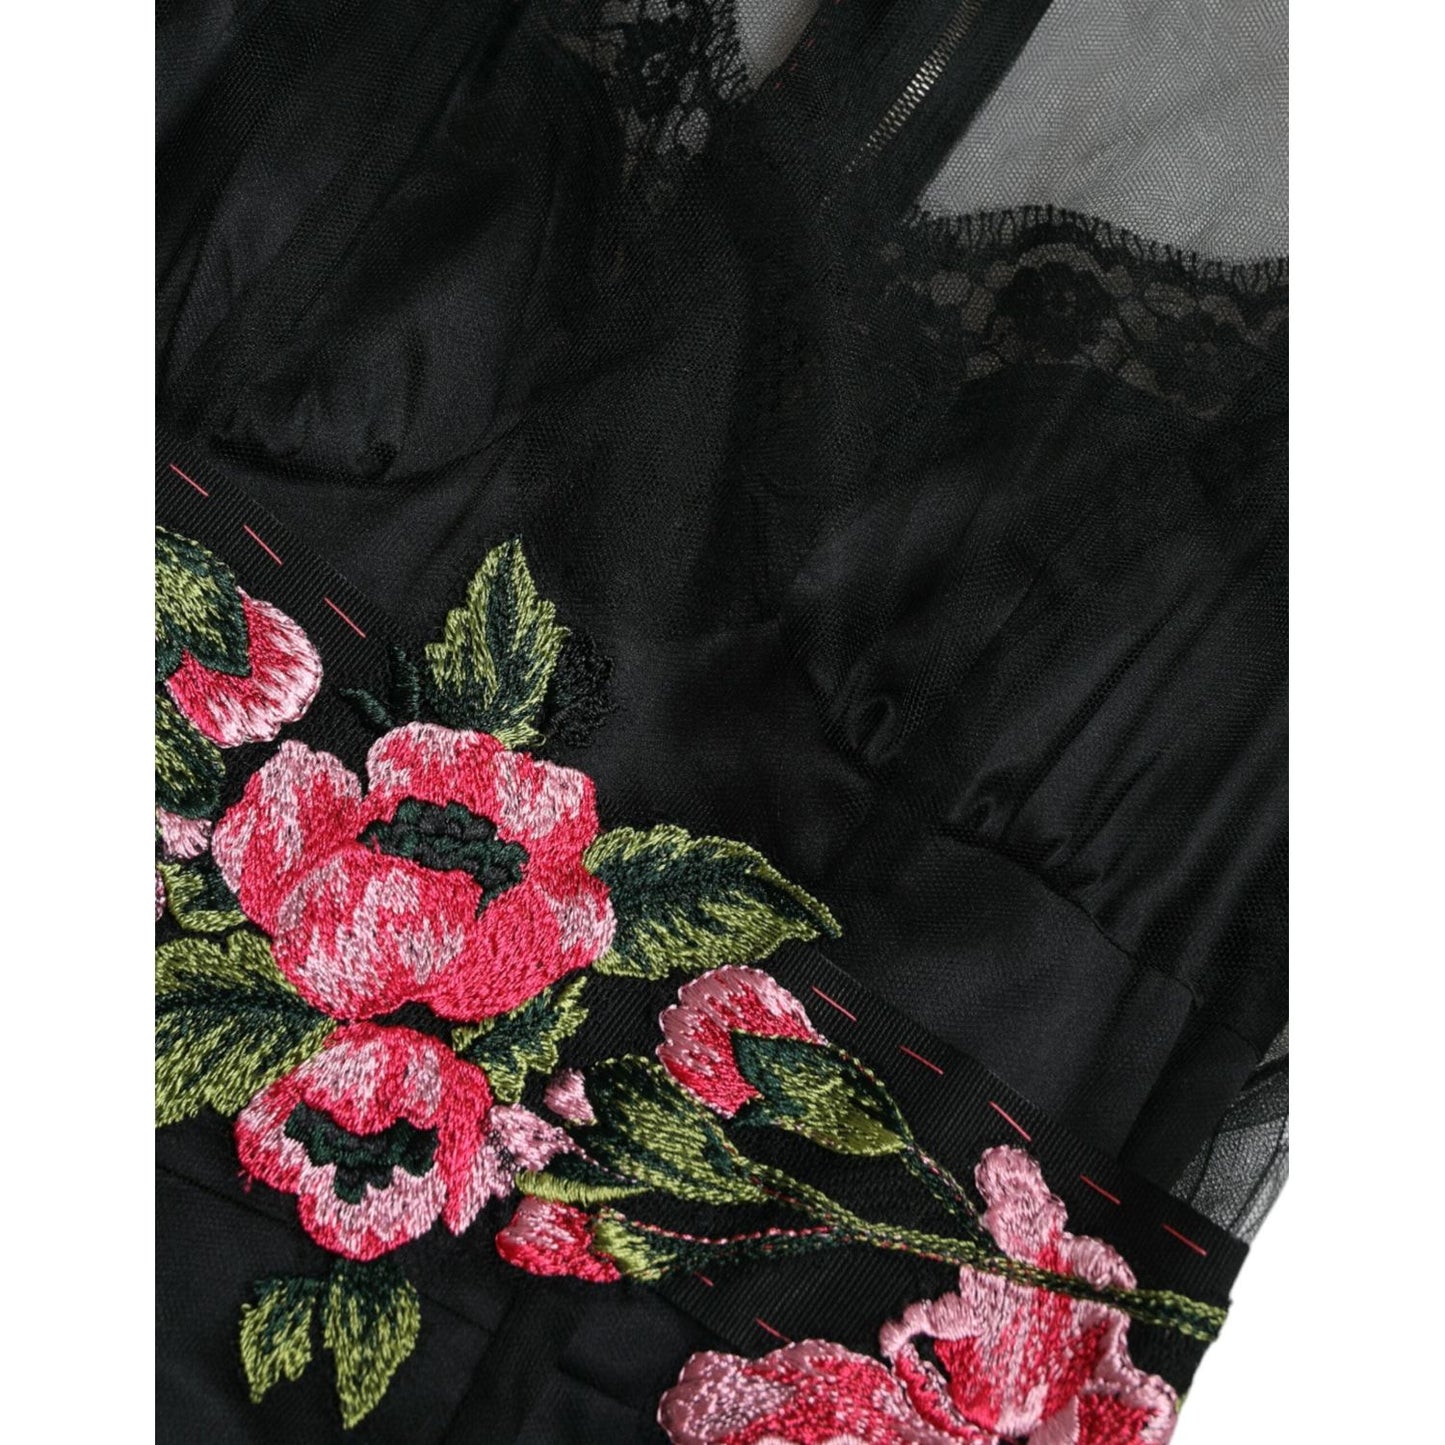 Dolce & Gabbana Floral Embroidery Tulle Long Evening Dress black-floral-embroidery-mesh-tulle-gown-dress